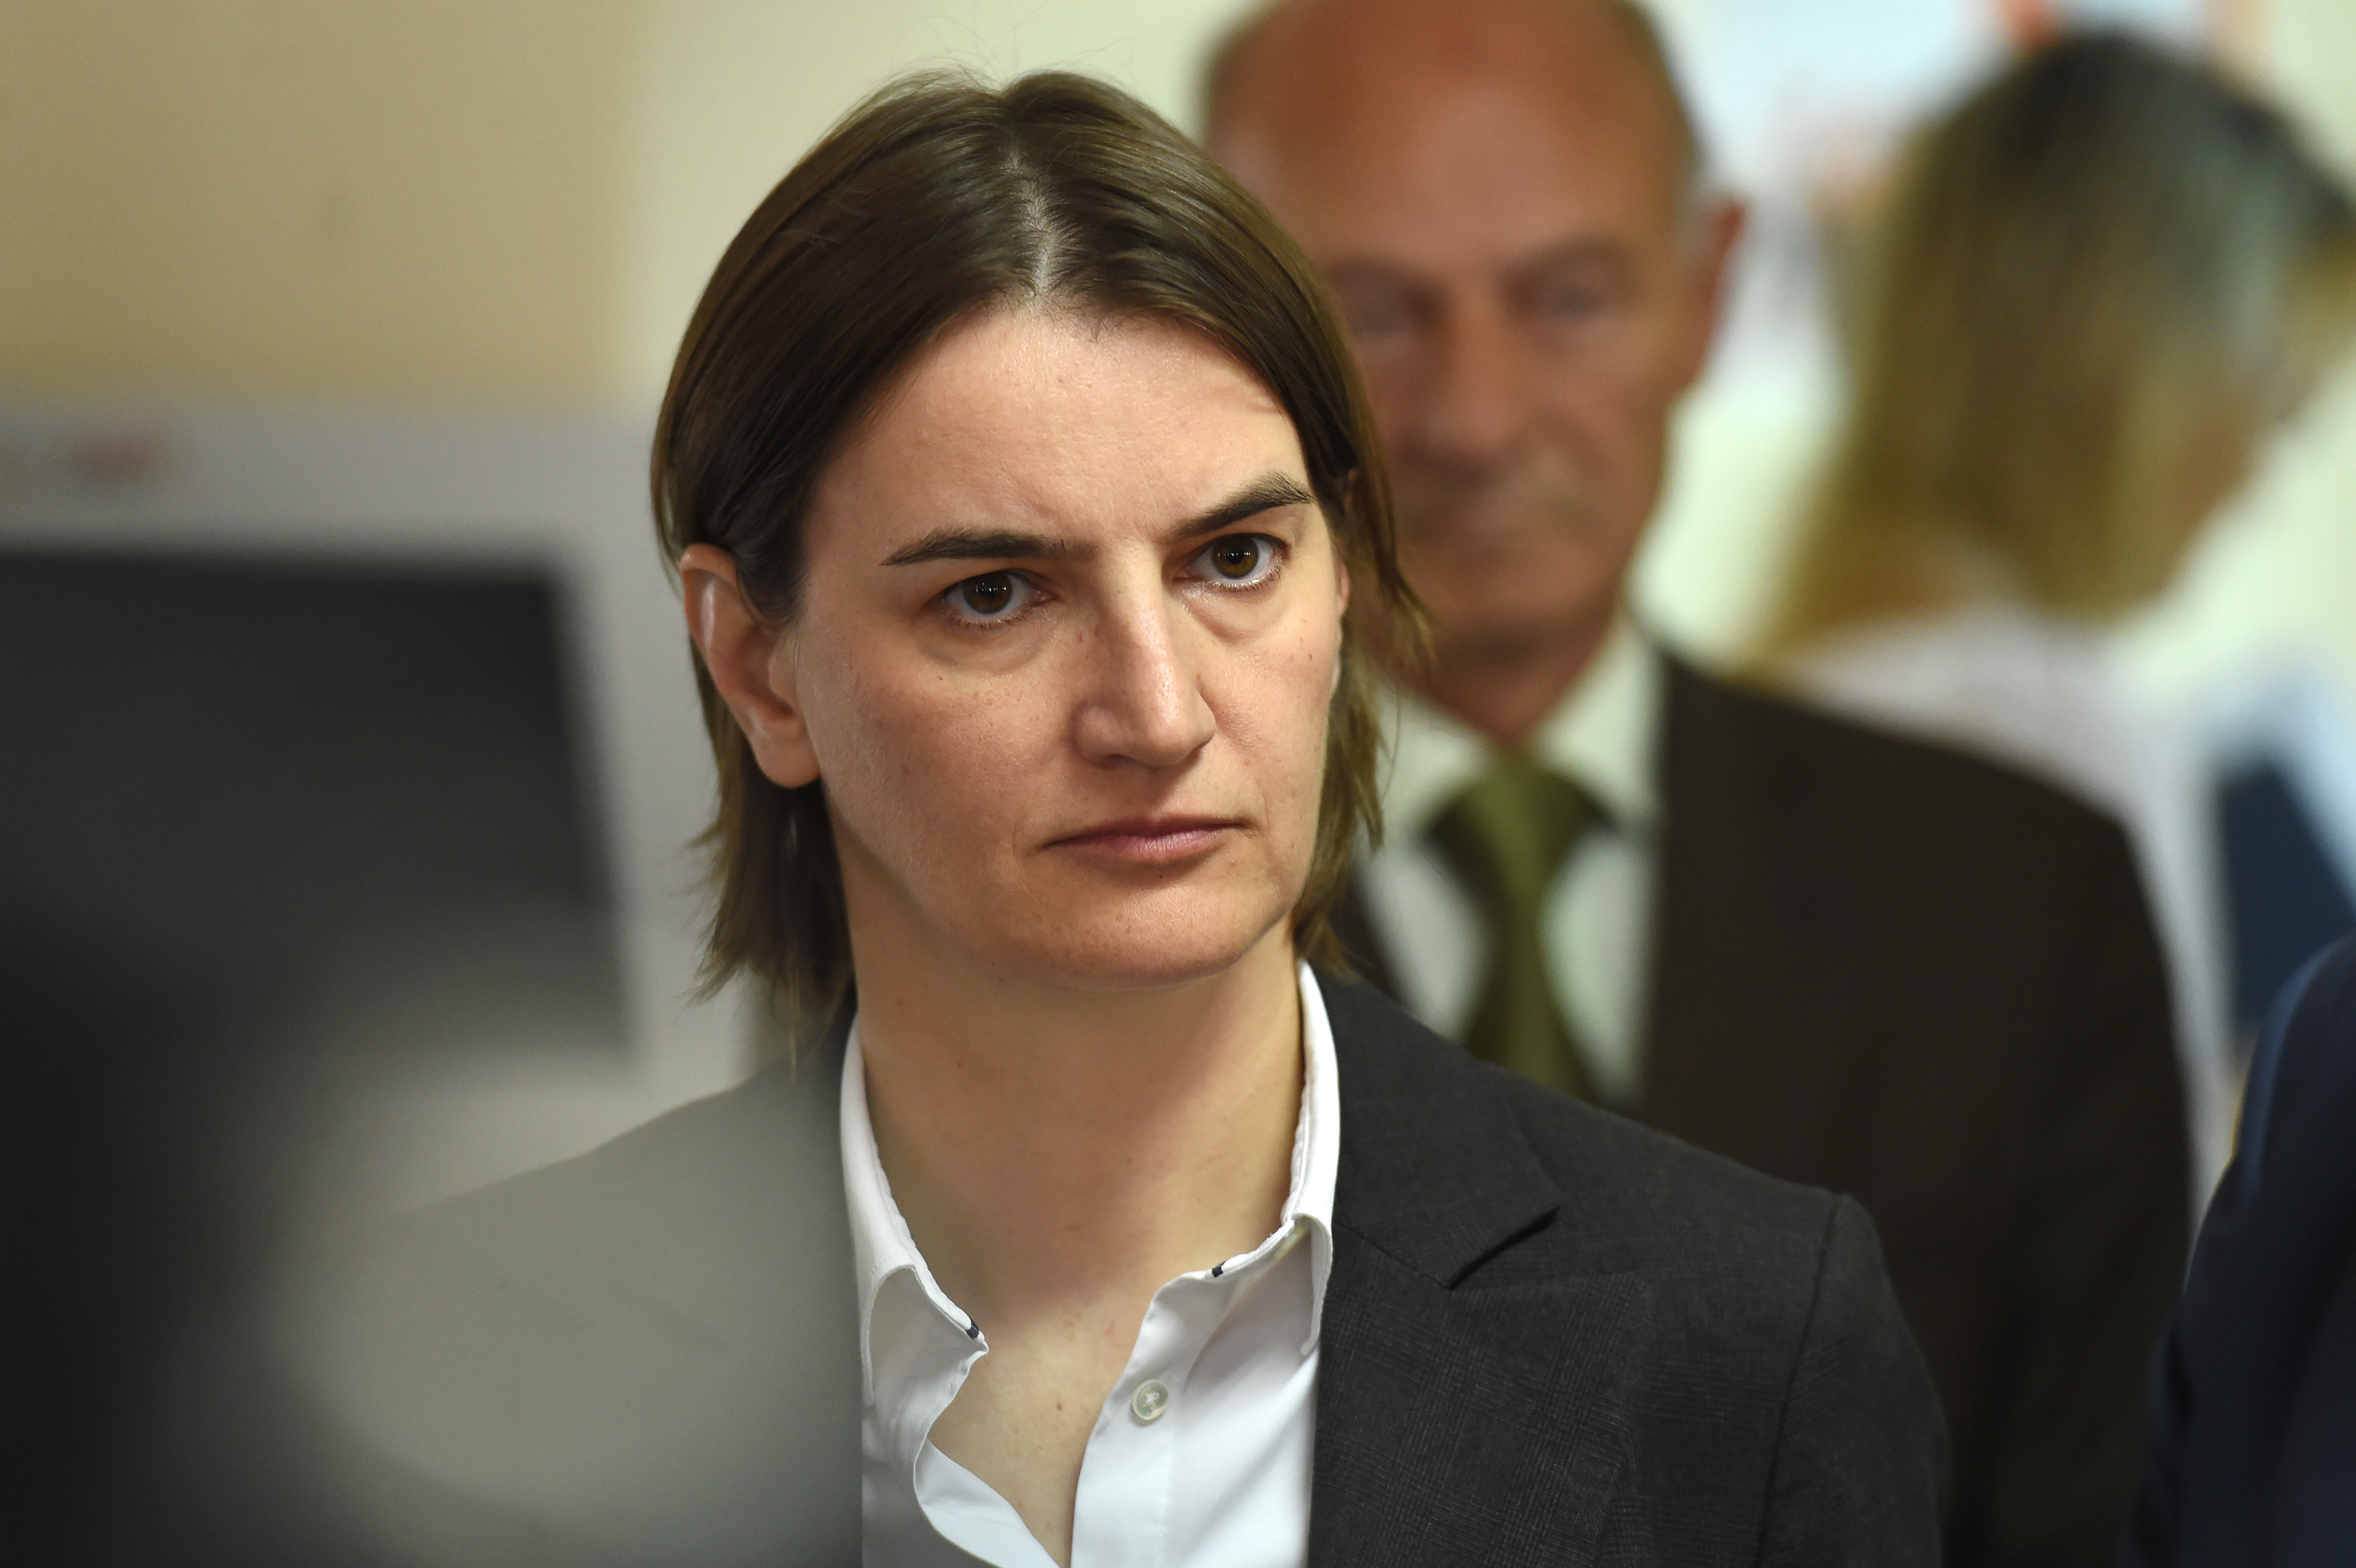 Serbia to have first gay prime minister as Ana Brnabic is chosen